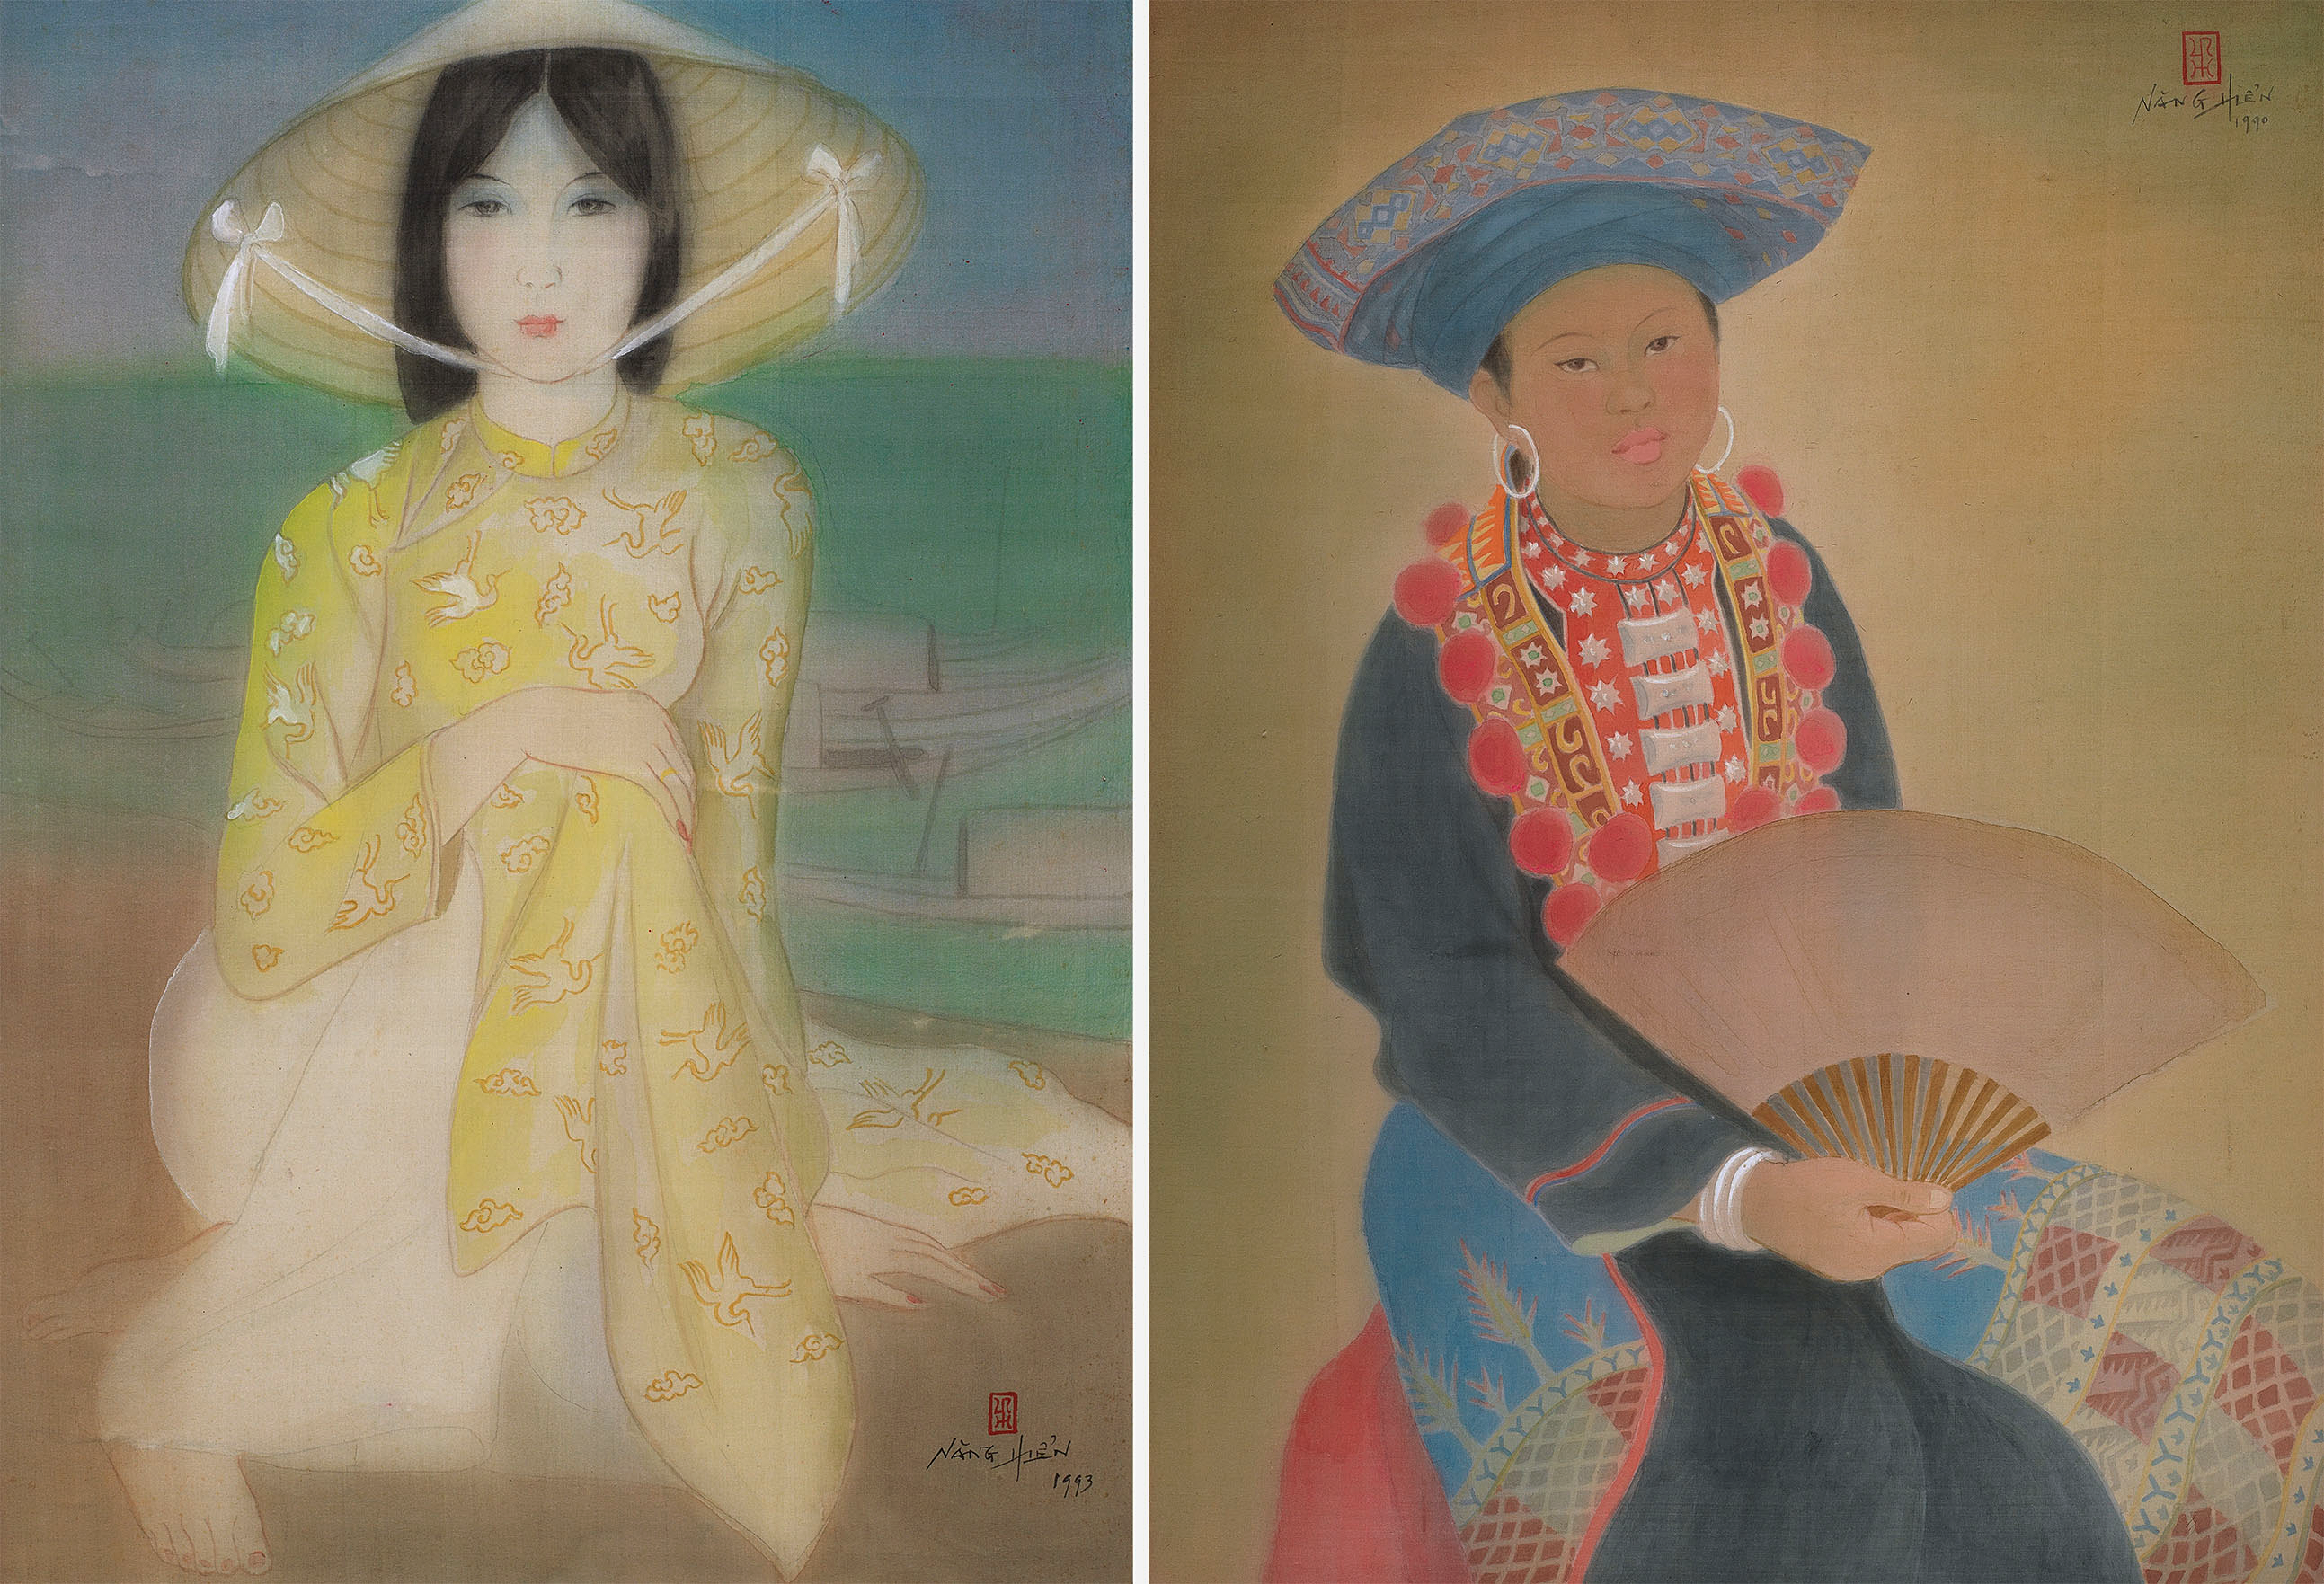 Woman at the Seaside; & Red Yao Woman of North Vietnam
signed and dated 'Nang Hien 1993' (lower right); & signed and dated 'Nang Hien 1990' (upper right)
two ink and gouache on silk
each: 60 x 43.5 cm. (23 5/8 x 17 1/8 in.) (2)
(2)Painted in 1993; & Painted in 1990
one seal of the artist (on each)